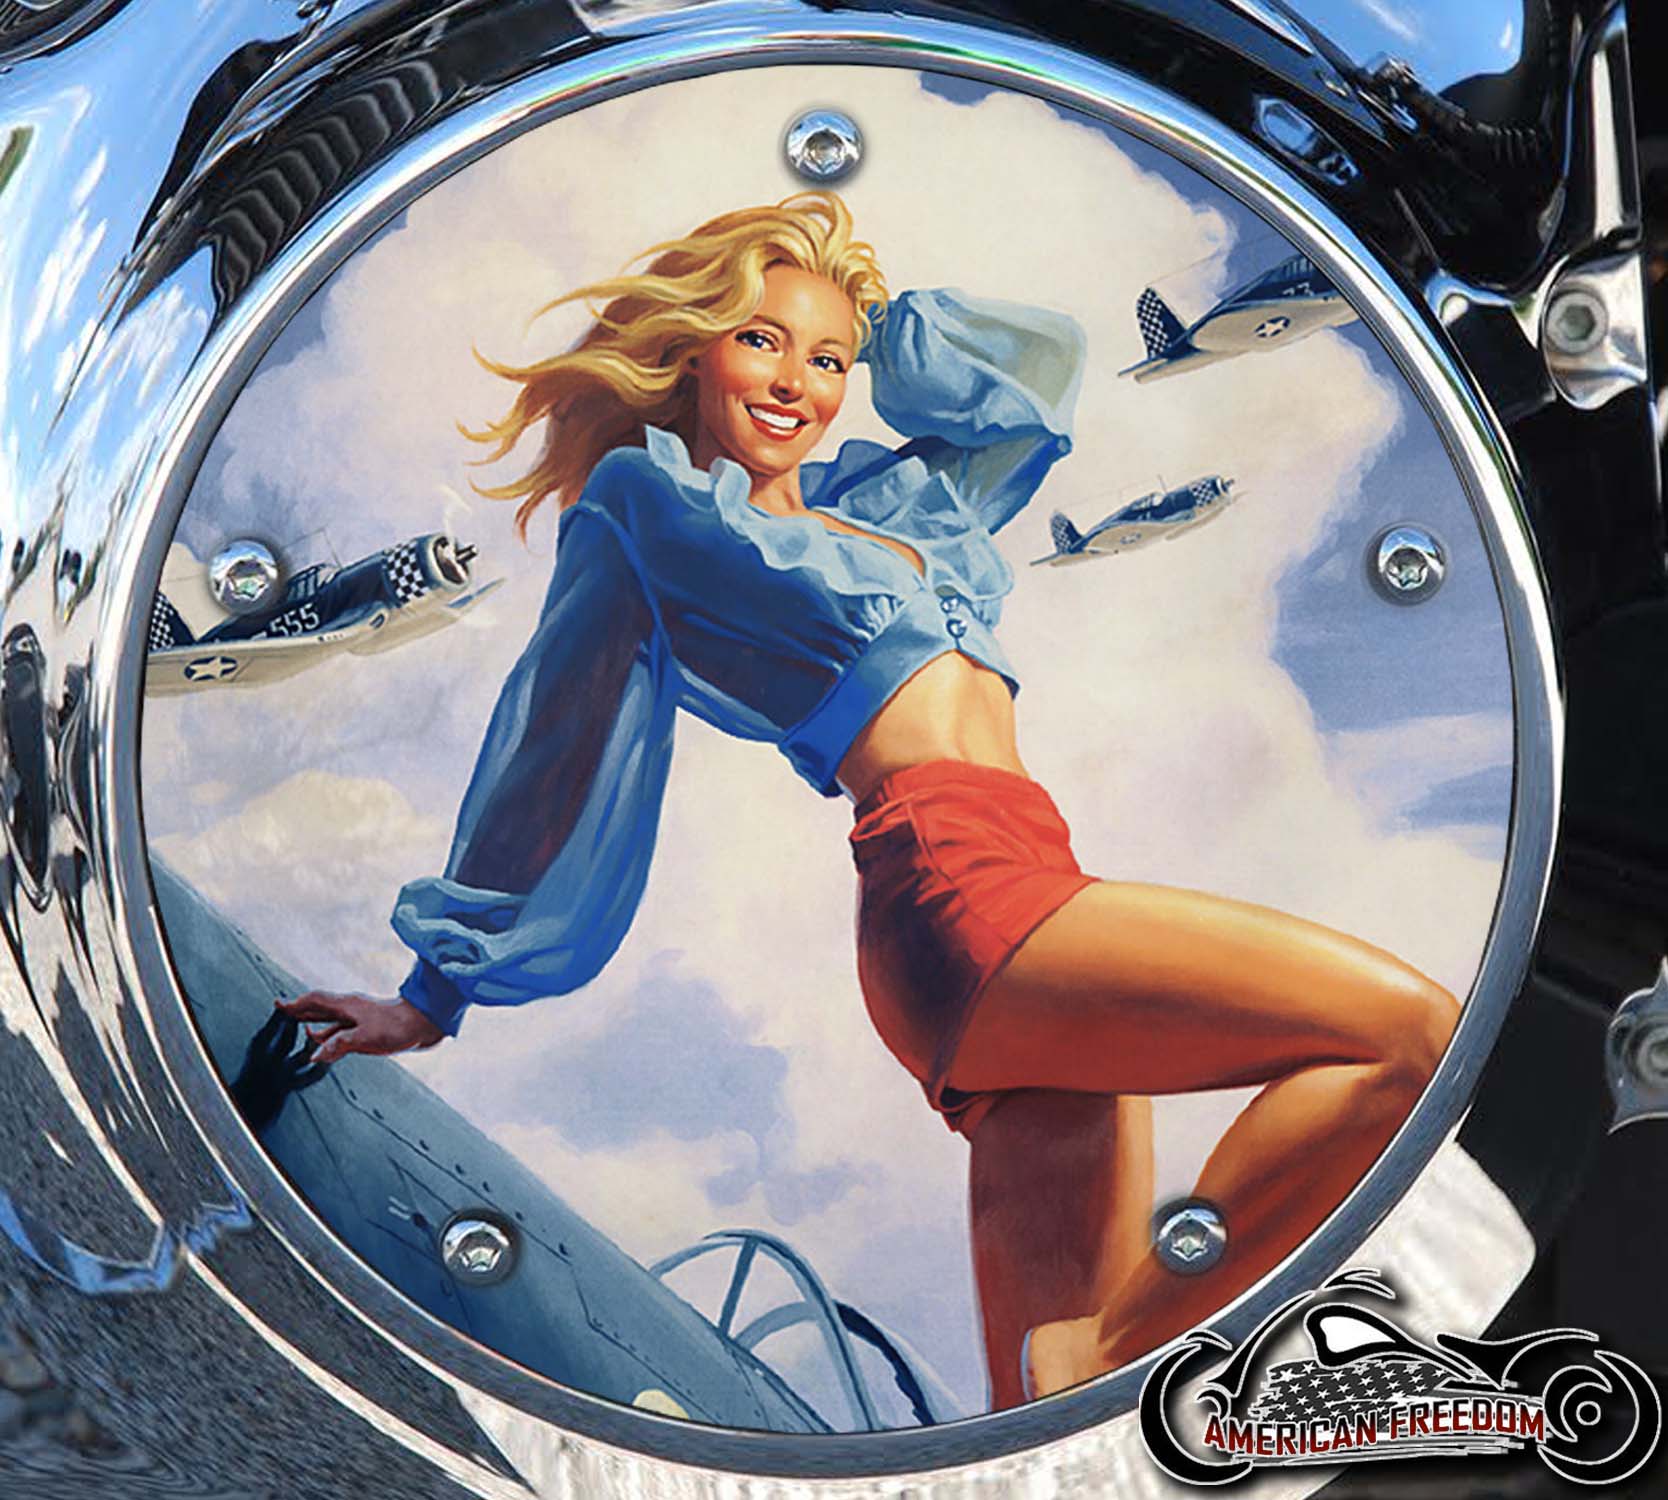 Custom Derby Cover Bomber Pin Up Harley Davidson Derby Cover 129